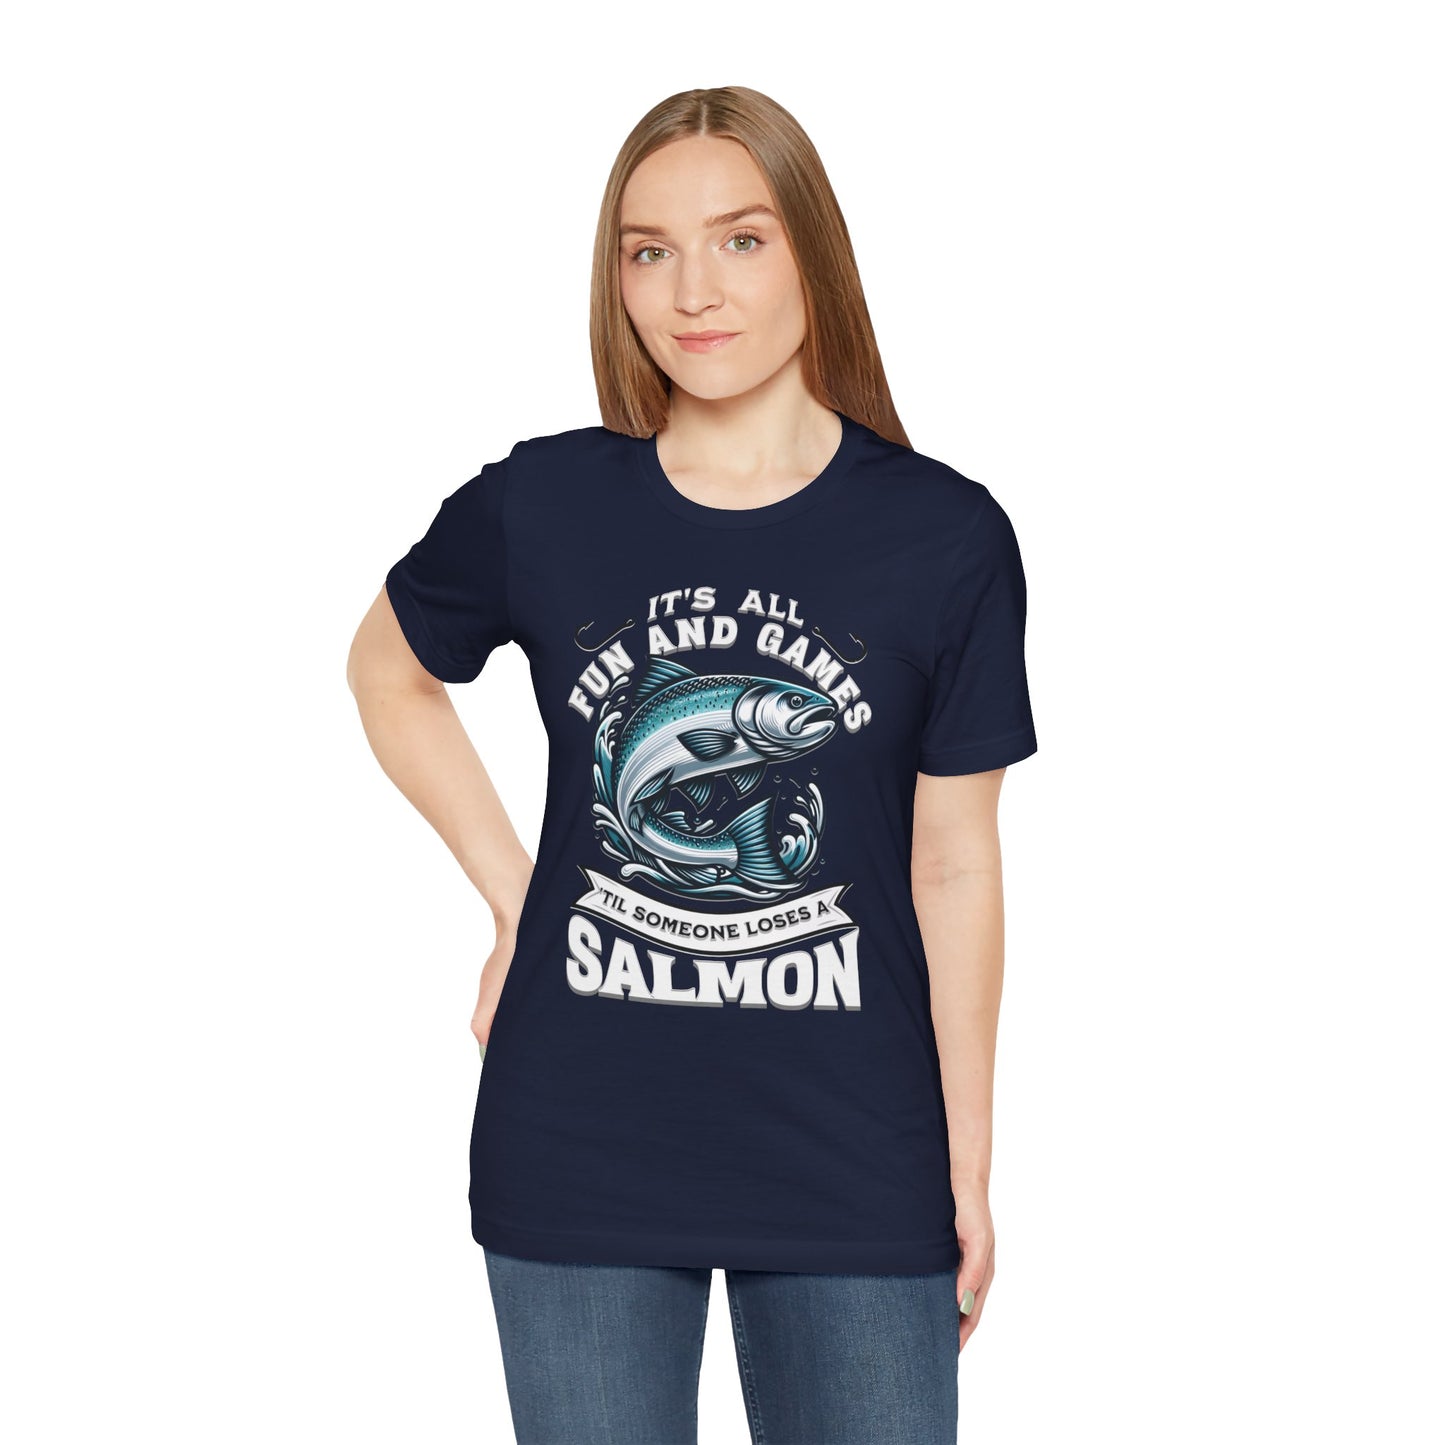 It's All Fun and Games Until Someone Loses a Salmon - T-Shirt